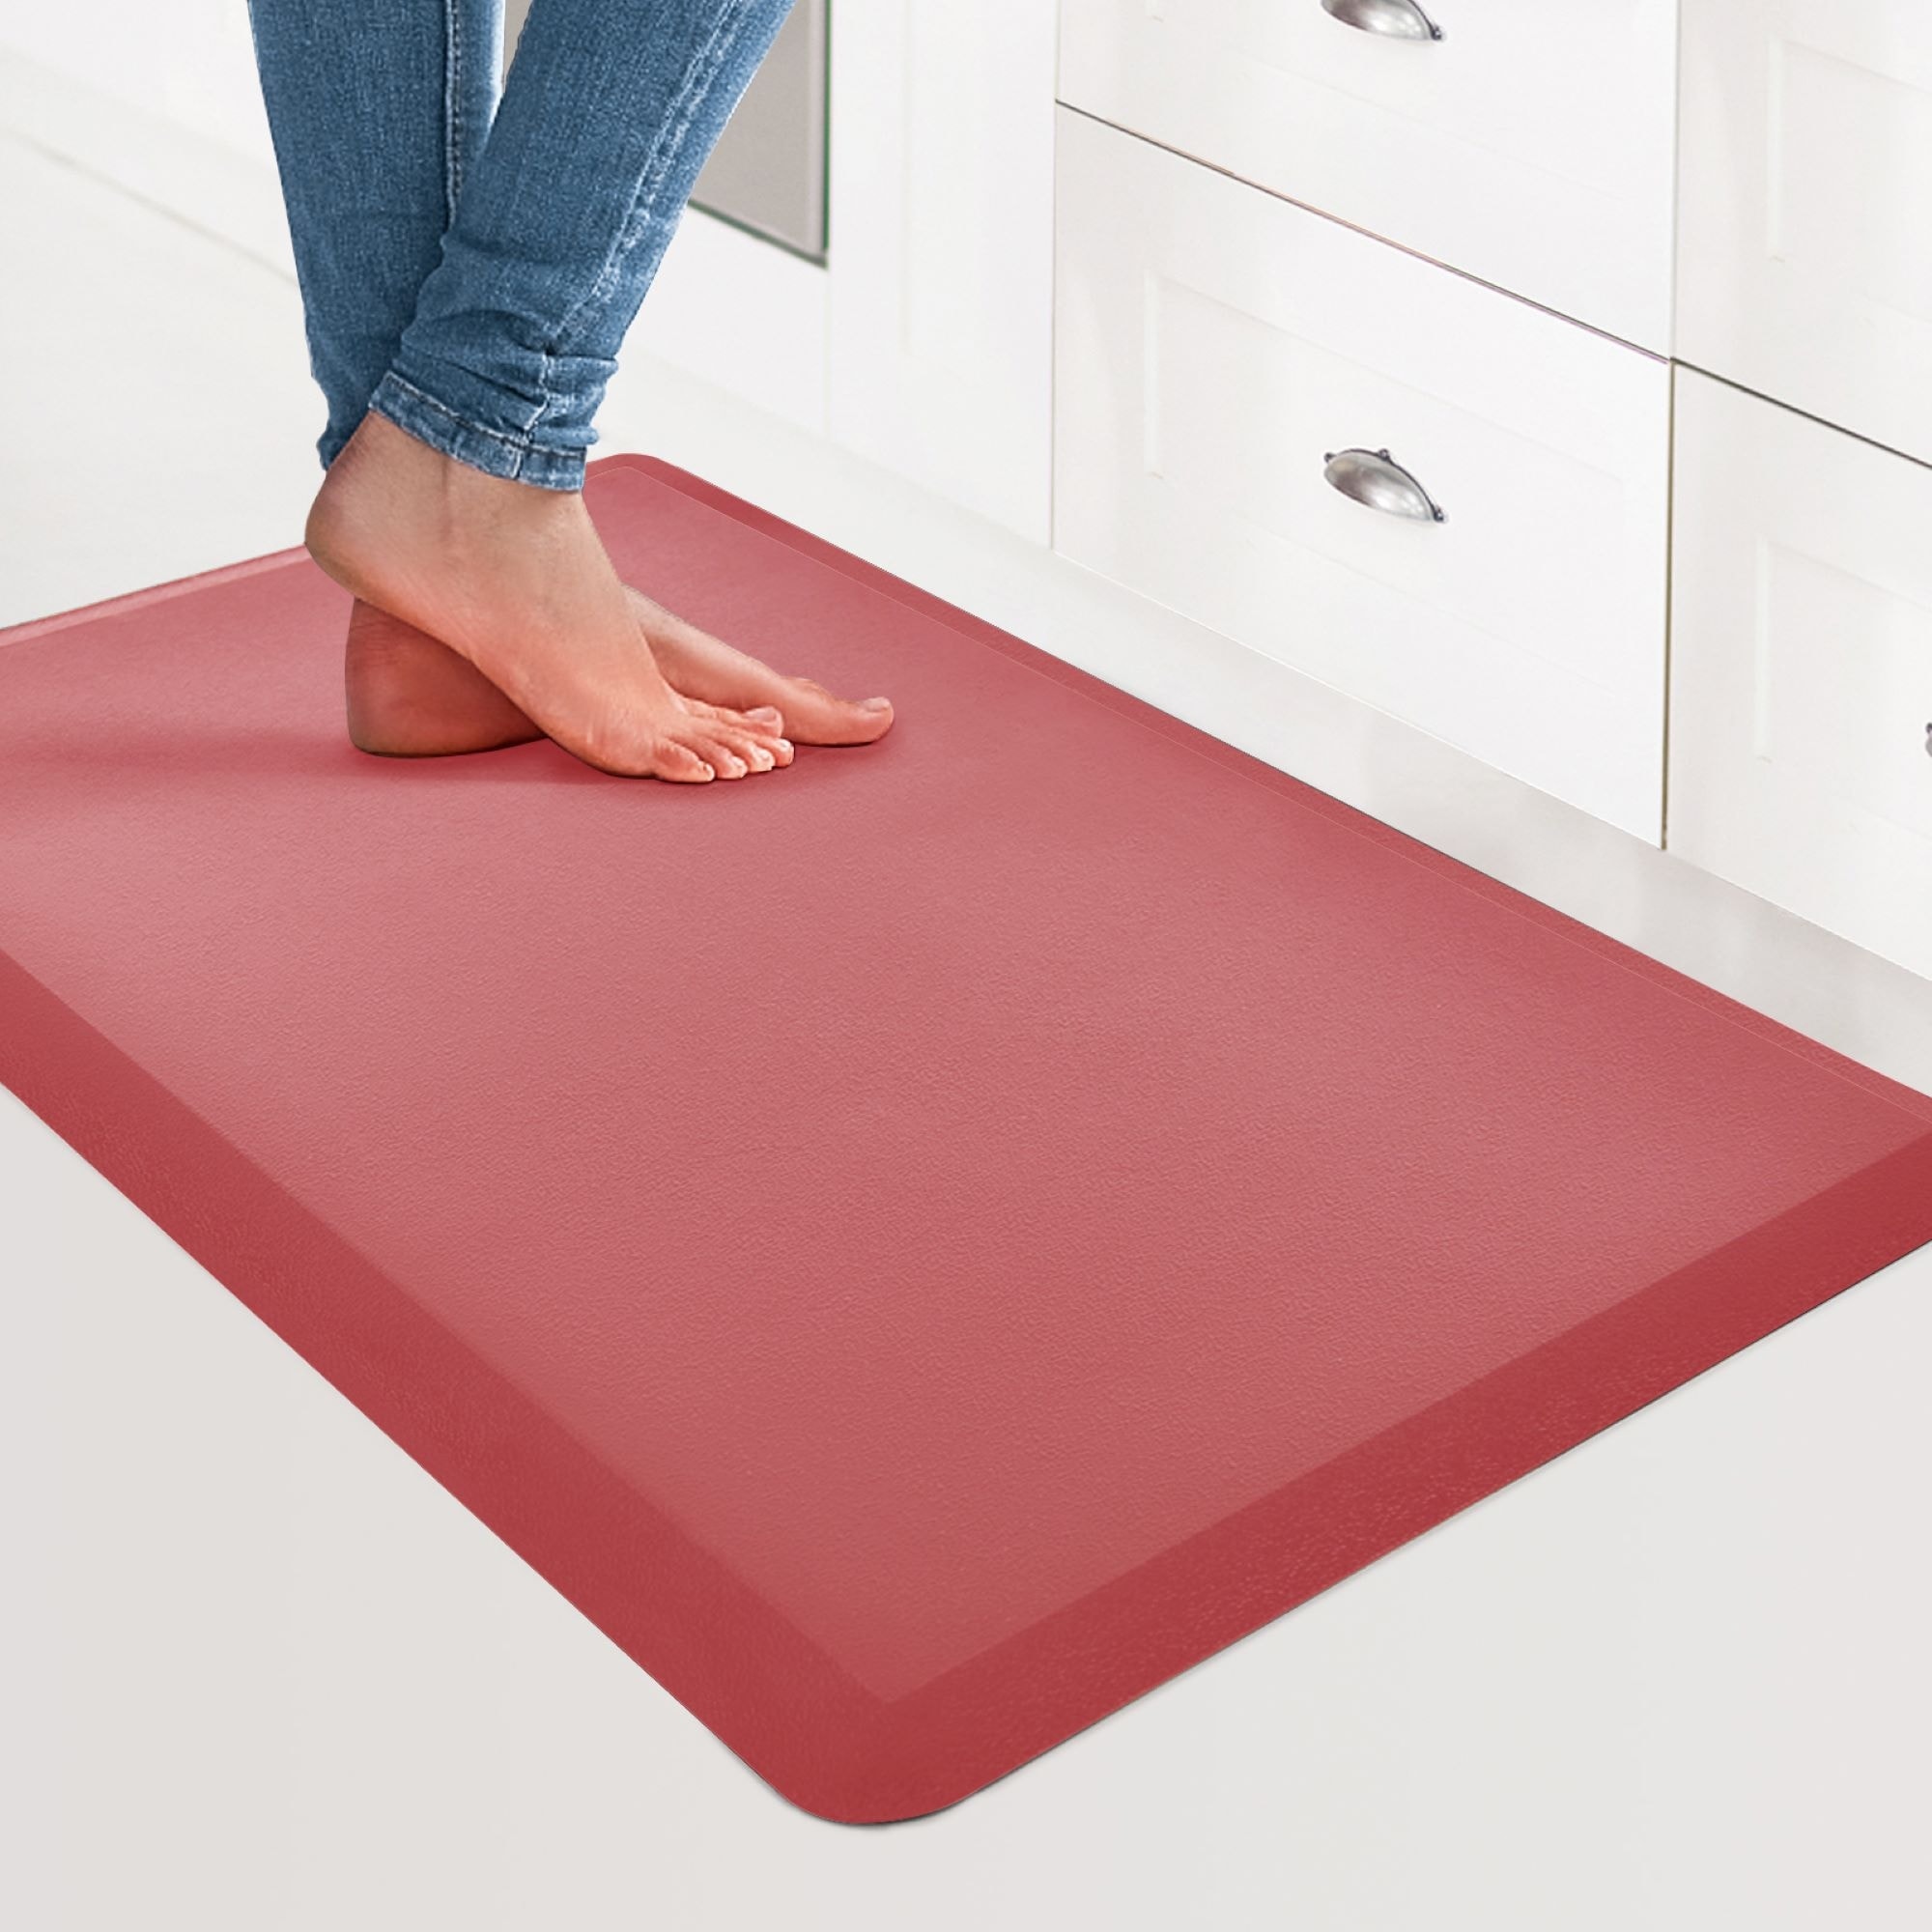 https://ak1.ostkcdn.com/images/products/is/images/direct/94bb8aefaa8cf20cd9b76ab194bc304b37b0e4b1/17.3%22x28%22-Anti-Fatigue-Comfort-Mat%2C1-2-Inch-Non-Slip-Foam-Cushioned-Kitchen-Mat.jpg